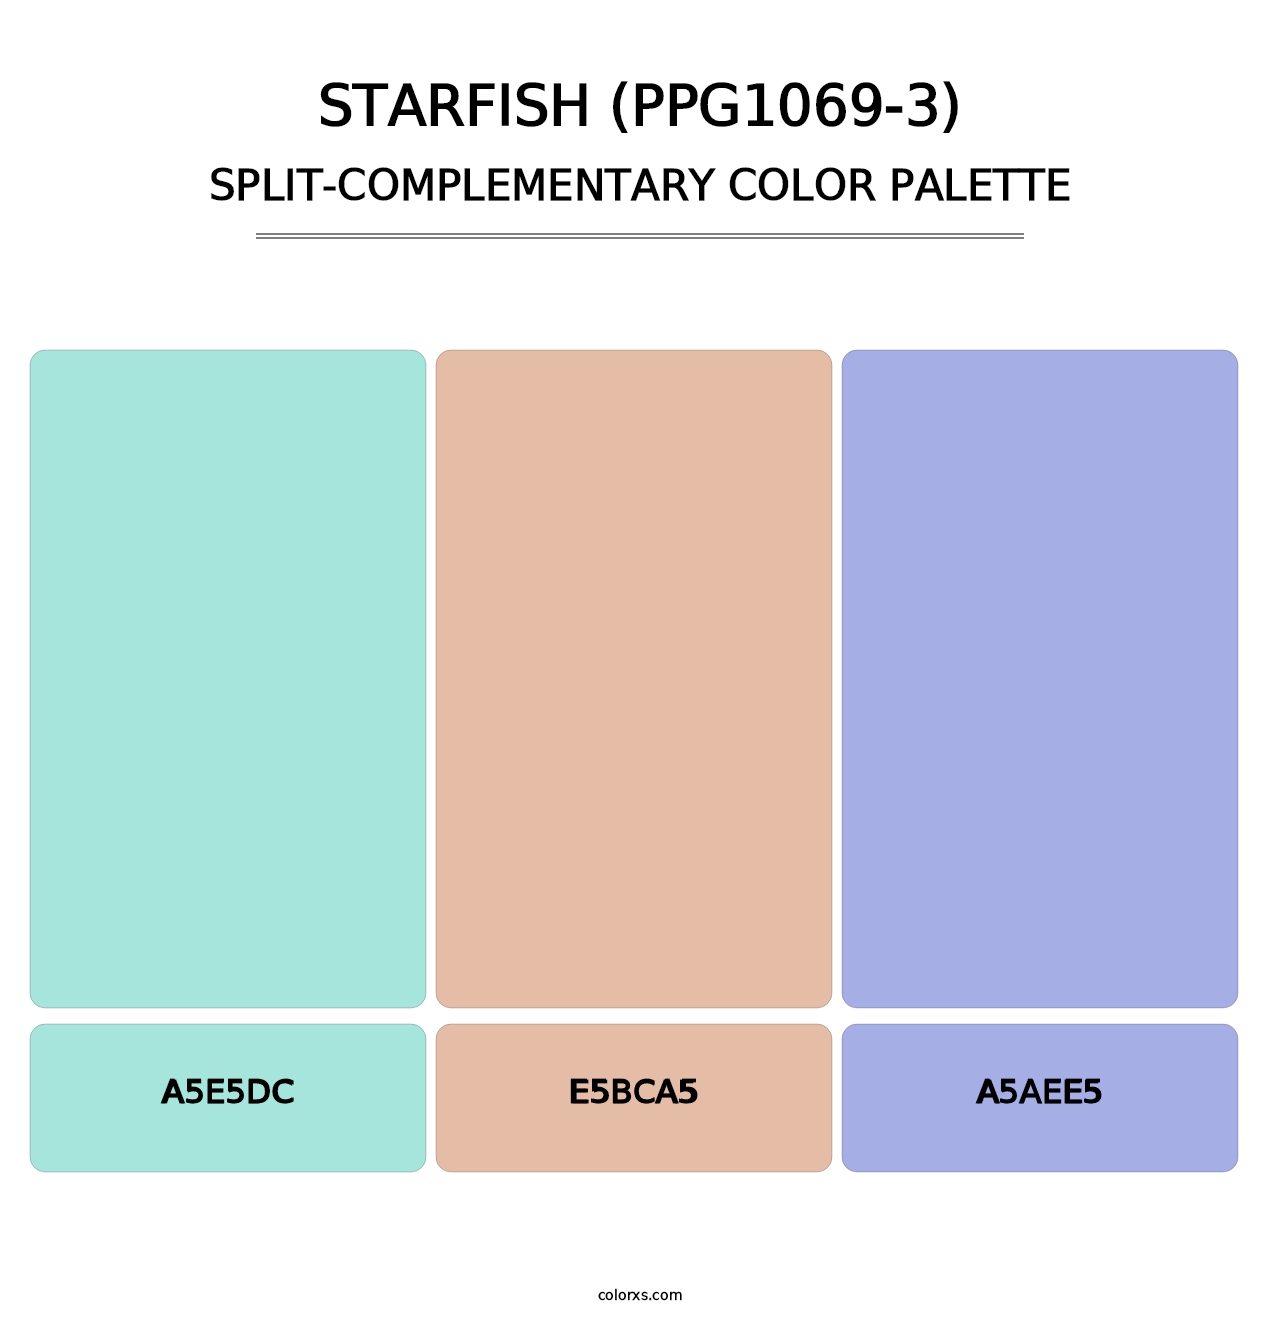 Starfish (PPG1069-3) - Split-Complementary Color Palette